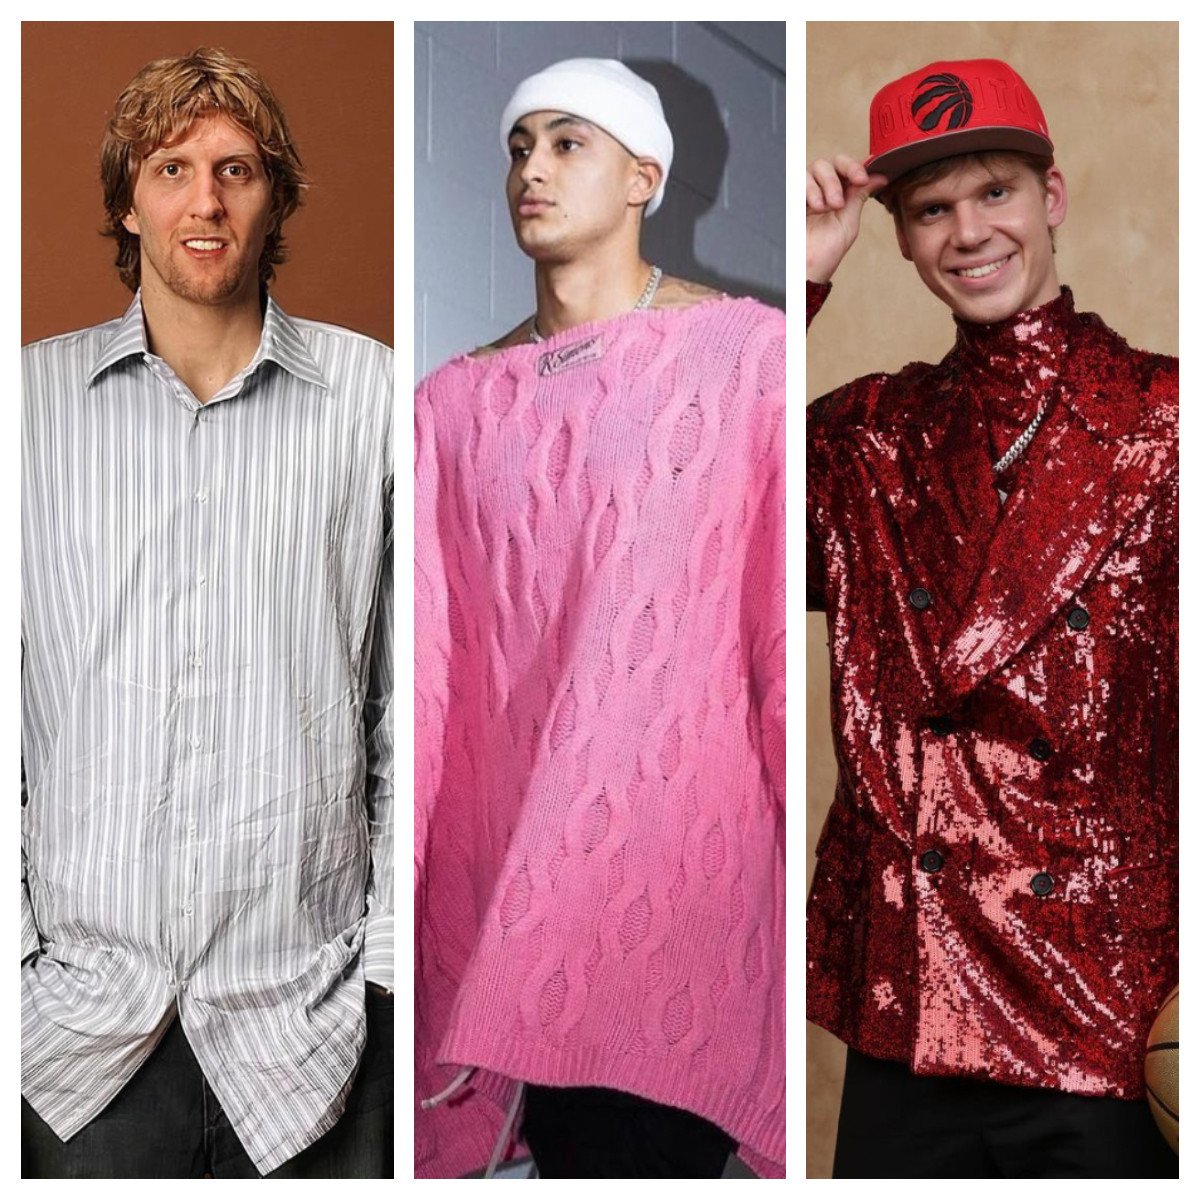 Being stylish on court is very different than being stylish off it, as these NBA stars prove ... pictured are Dirk Nowitzki, Kyle Kuzma and Gradey Dick. Photos: Instagram